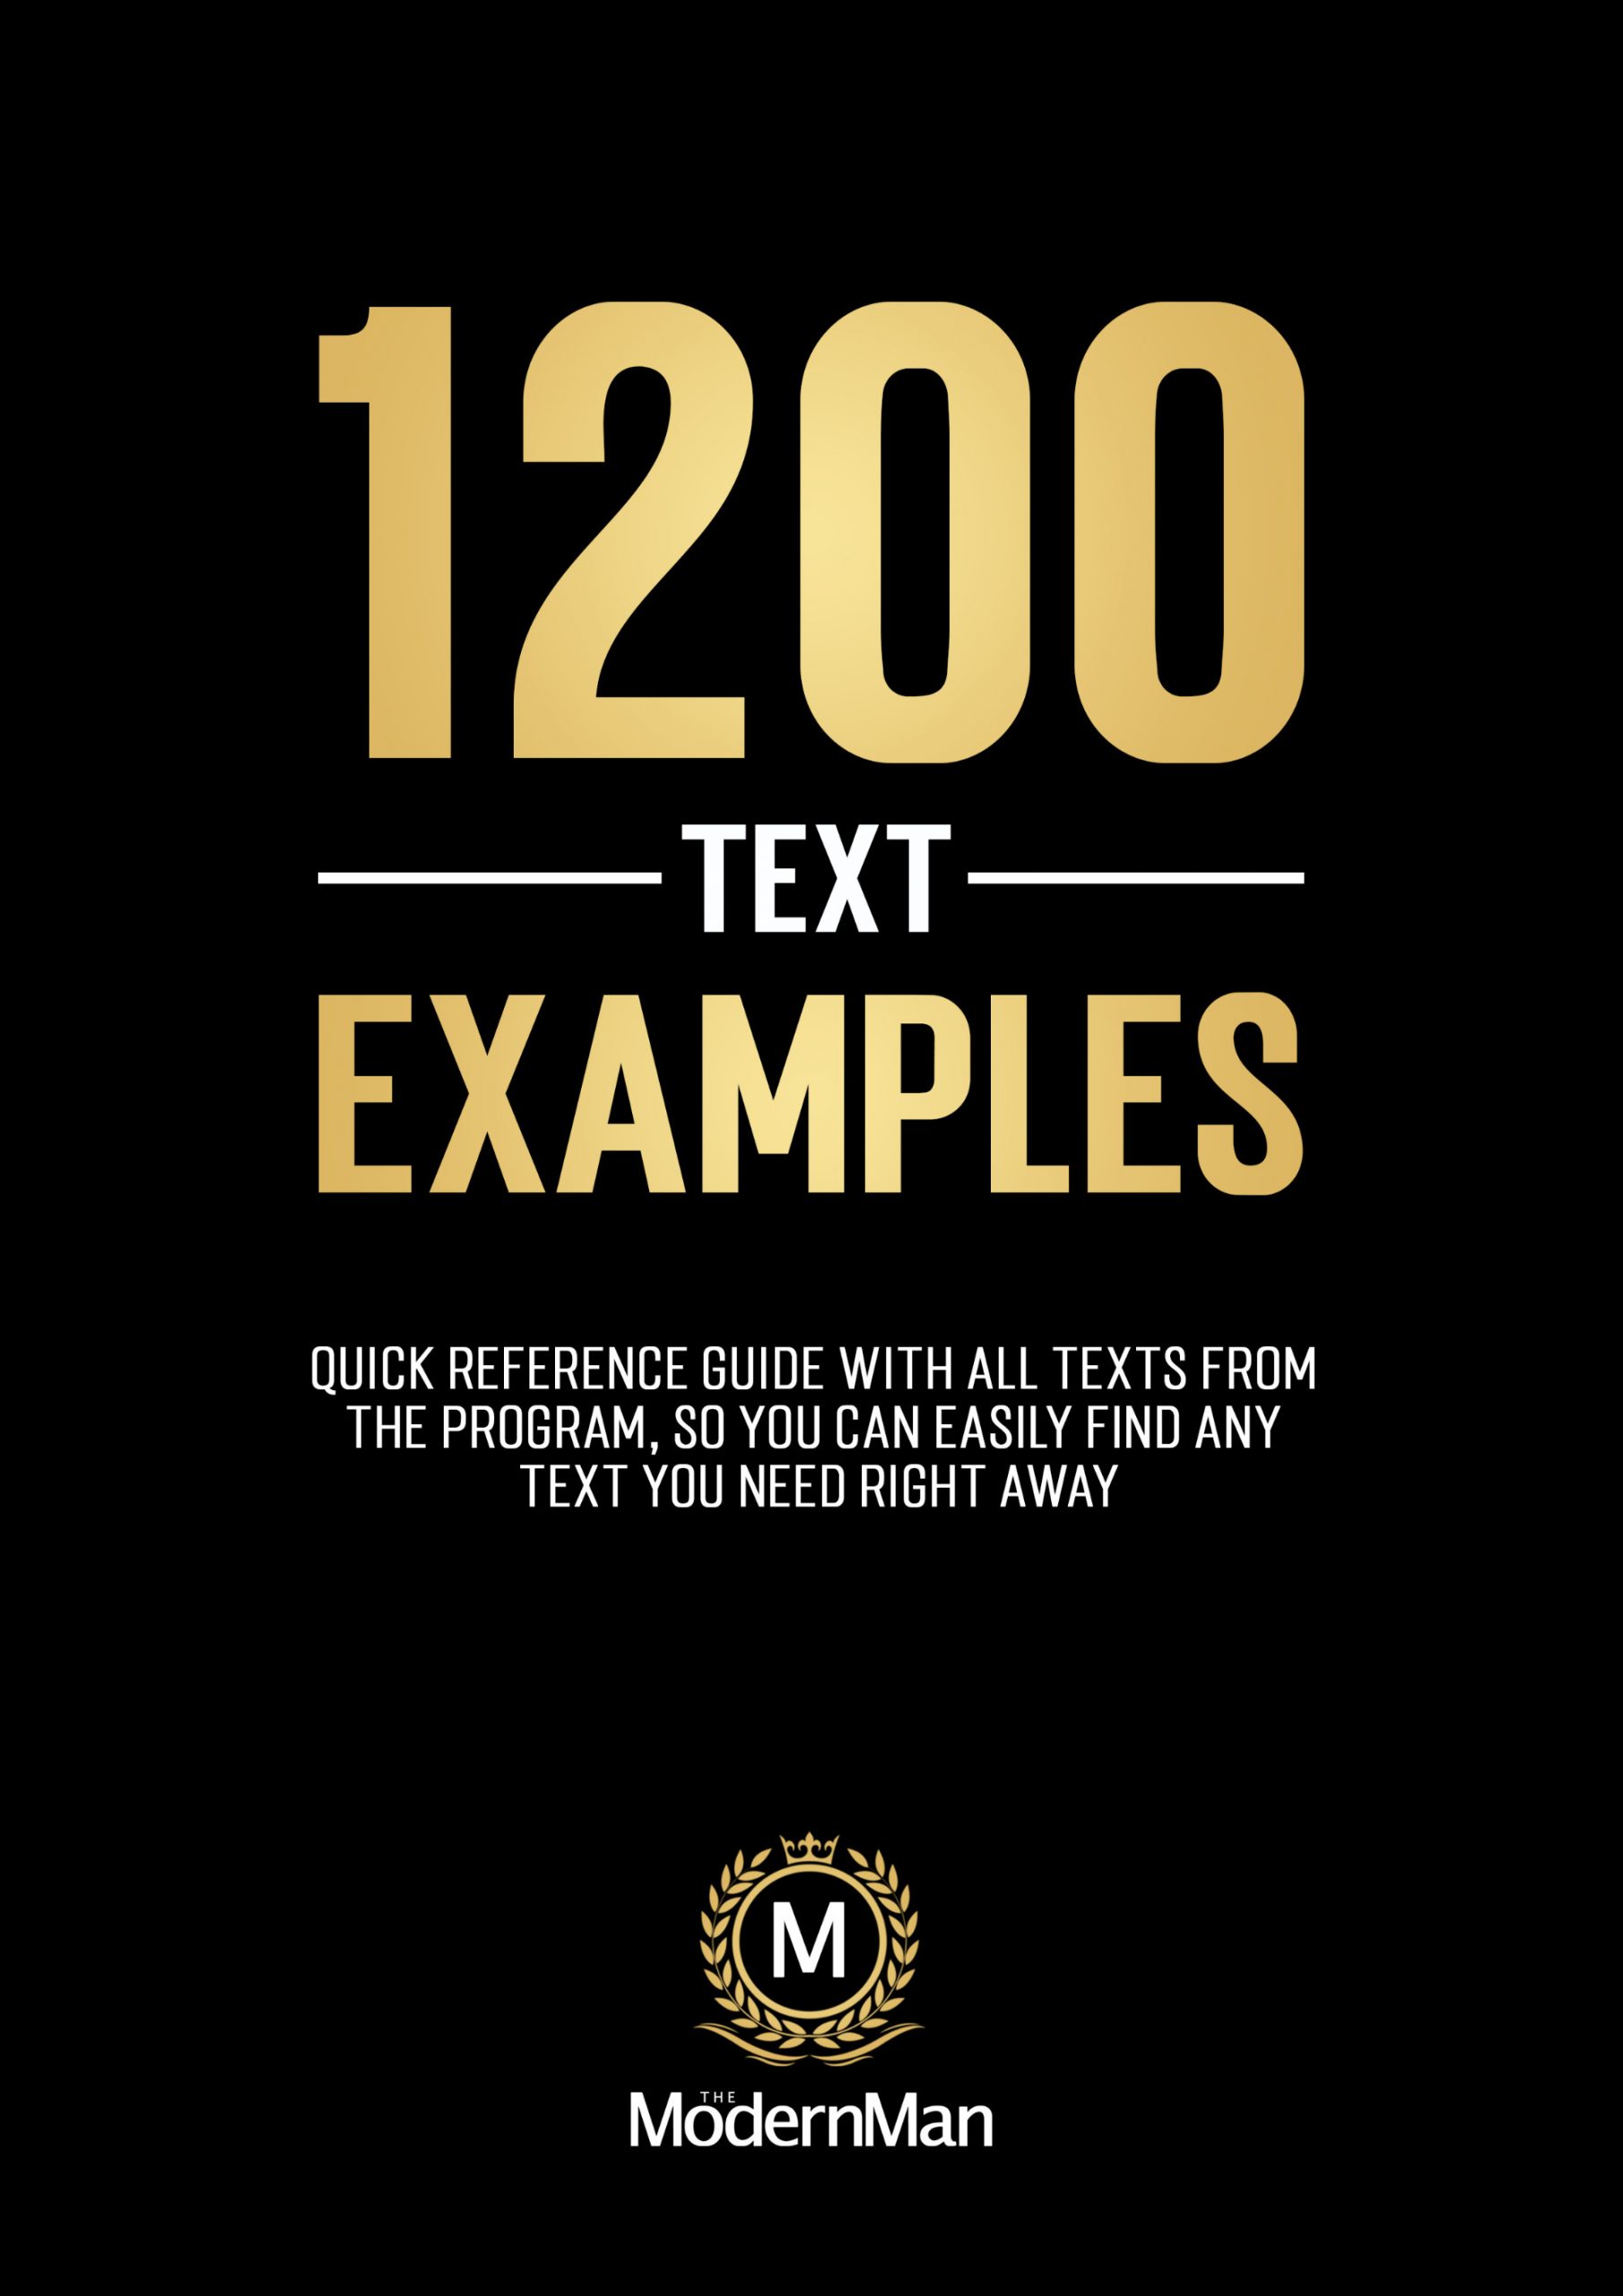 1200 Text Examples by Dan Bacon